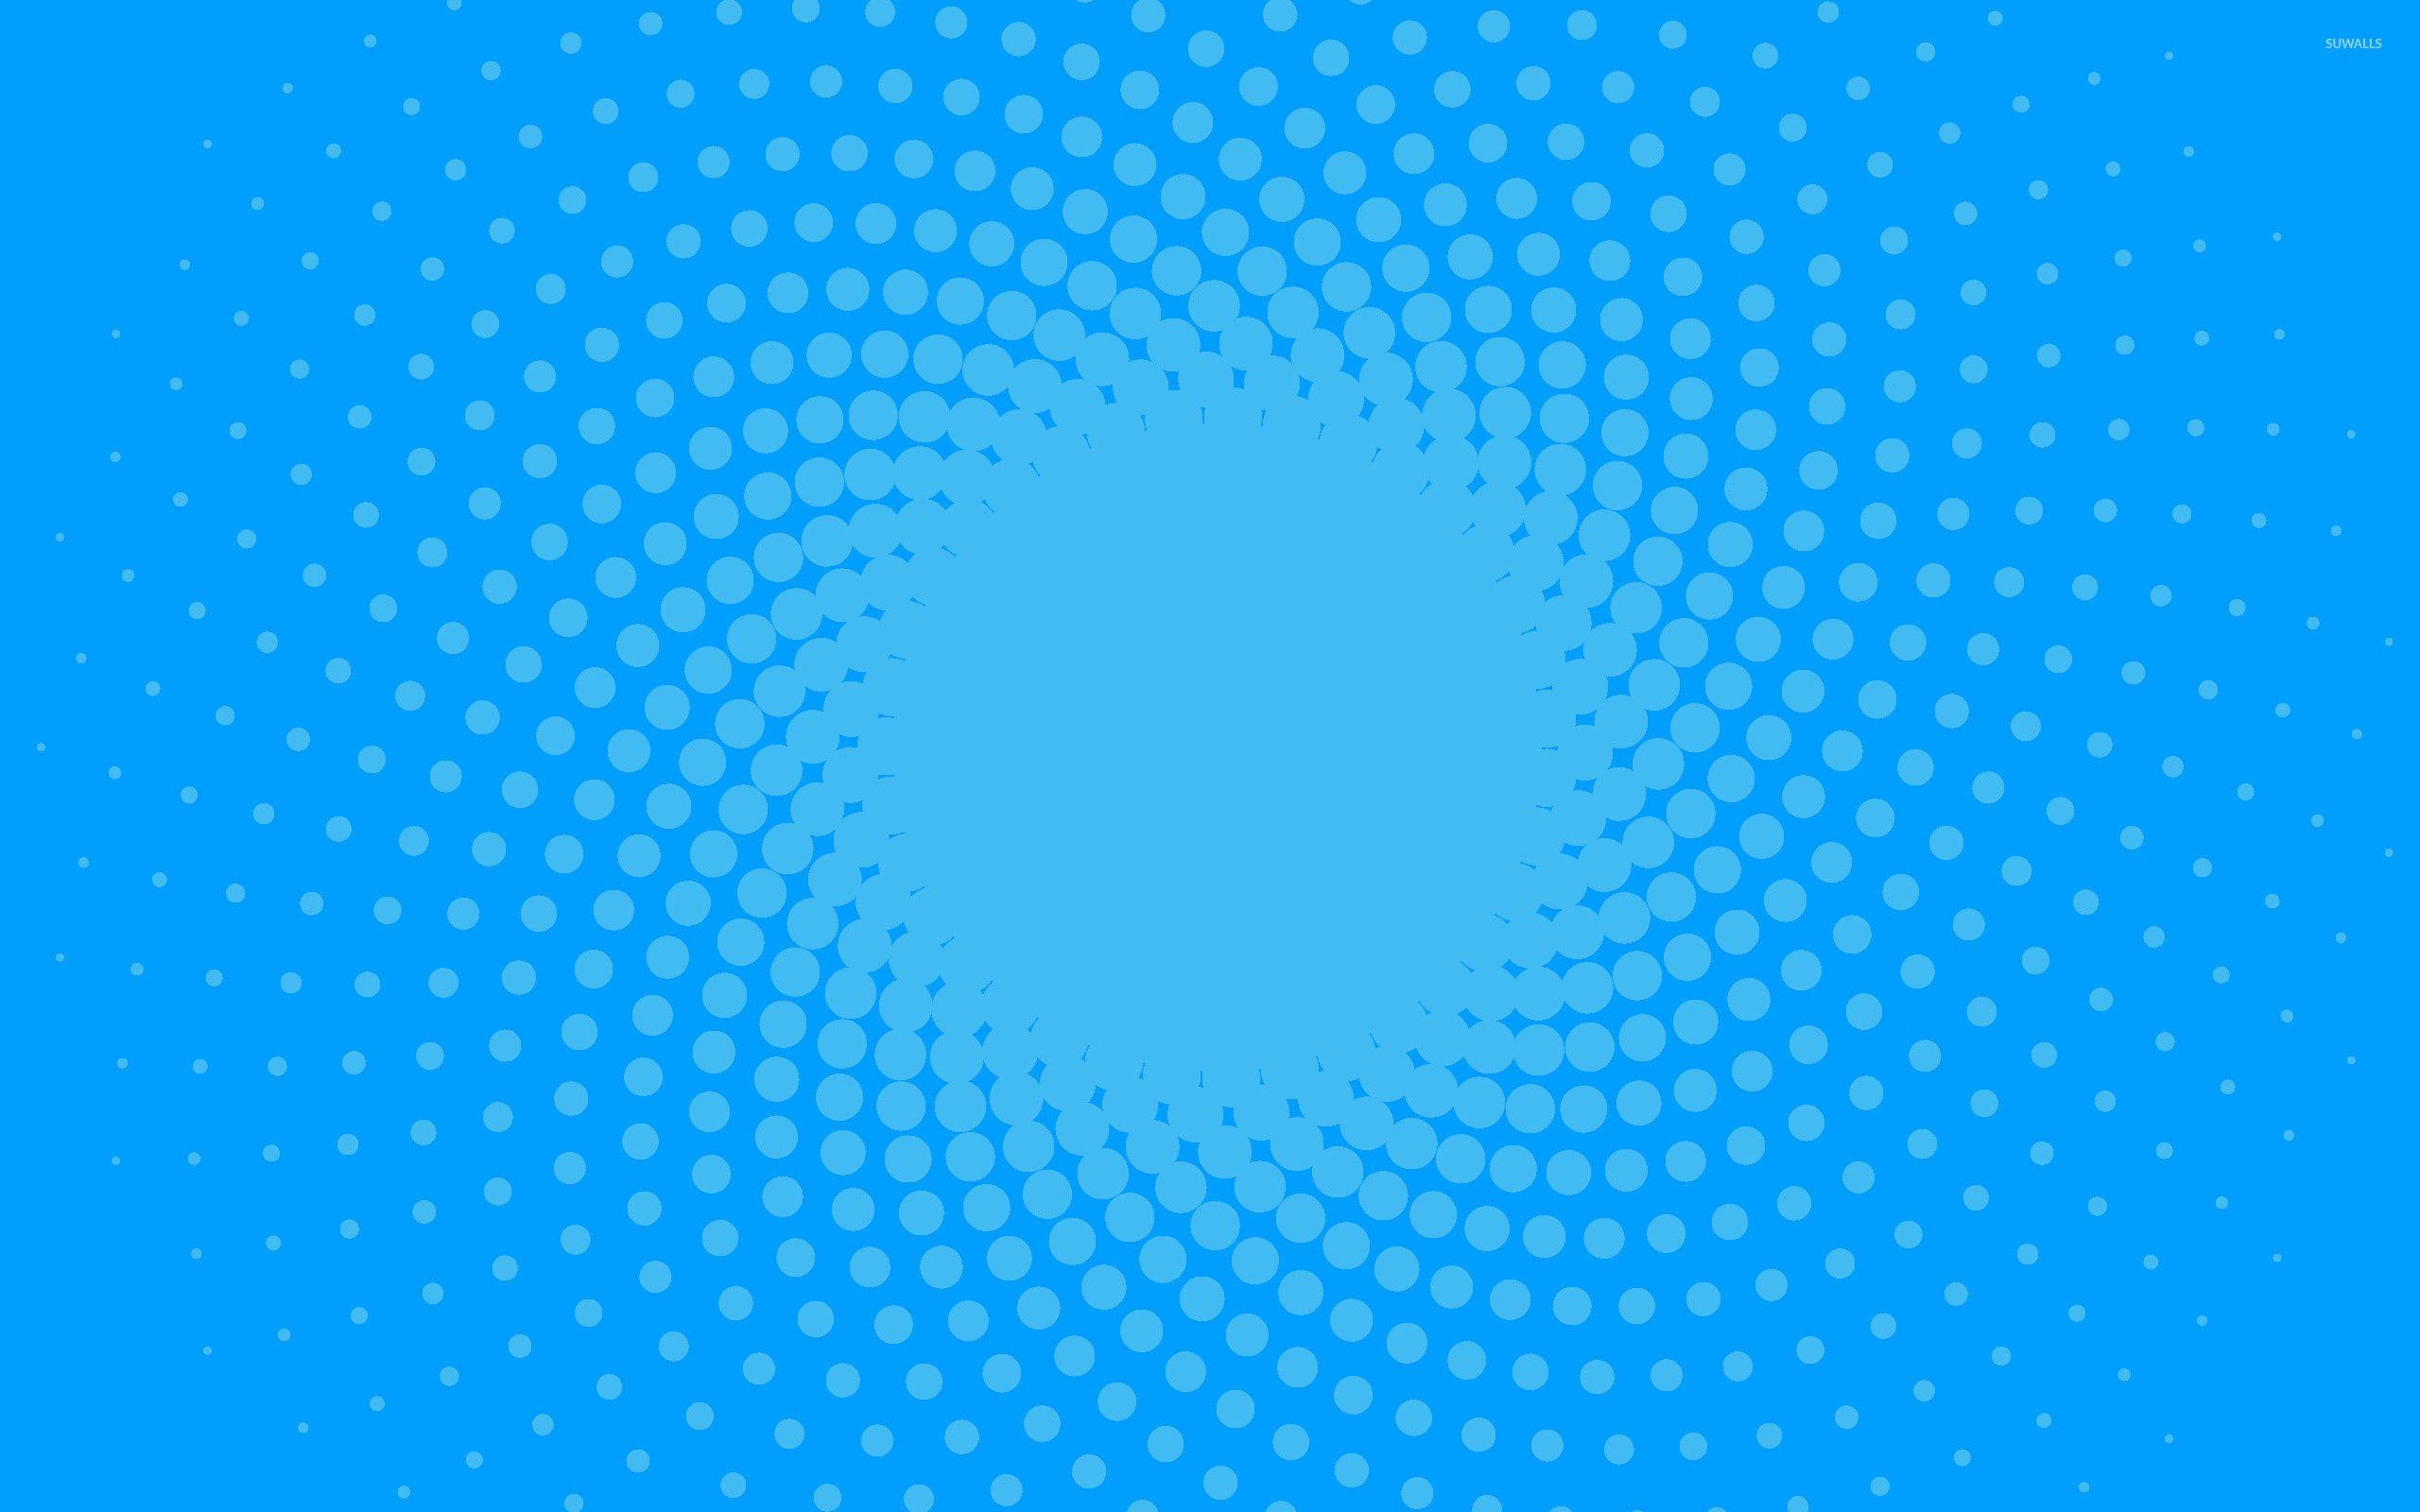 Details 100 blue circle background - Abzlocal.mx